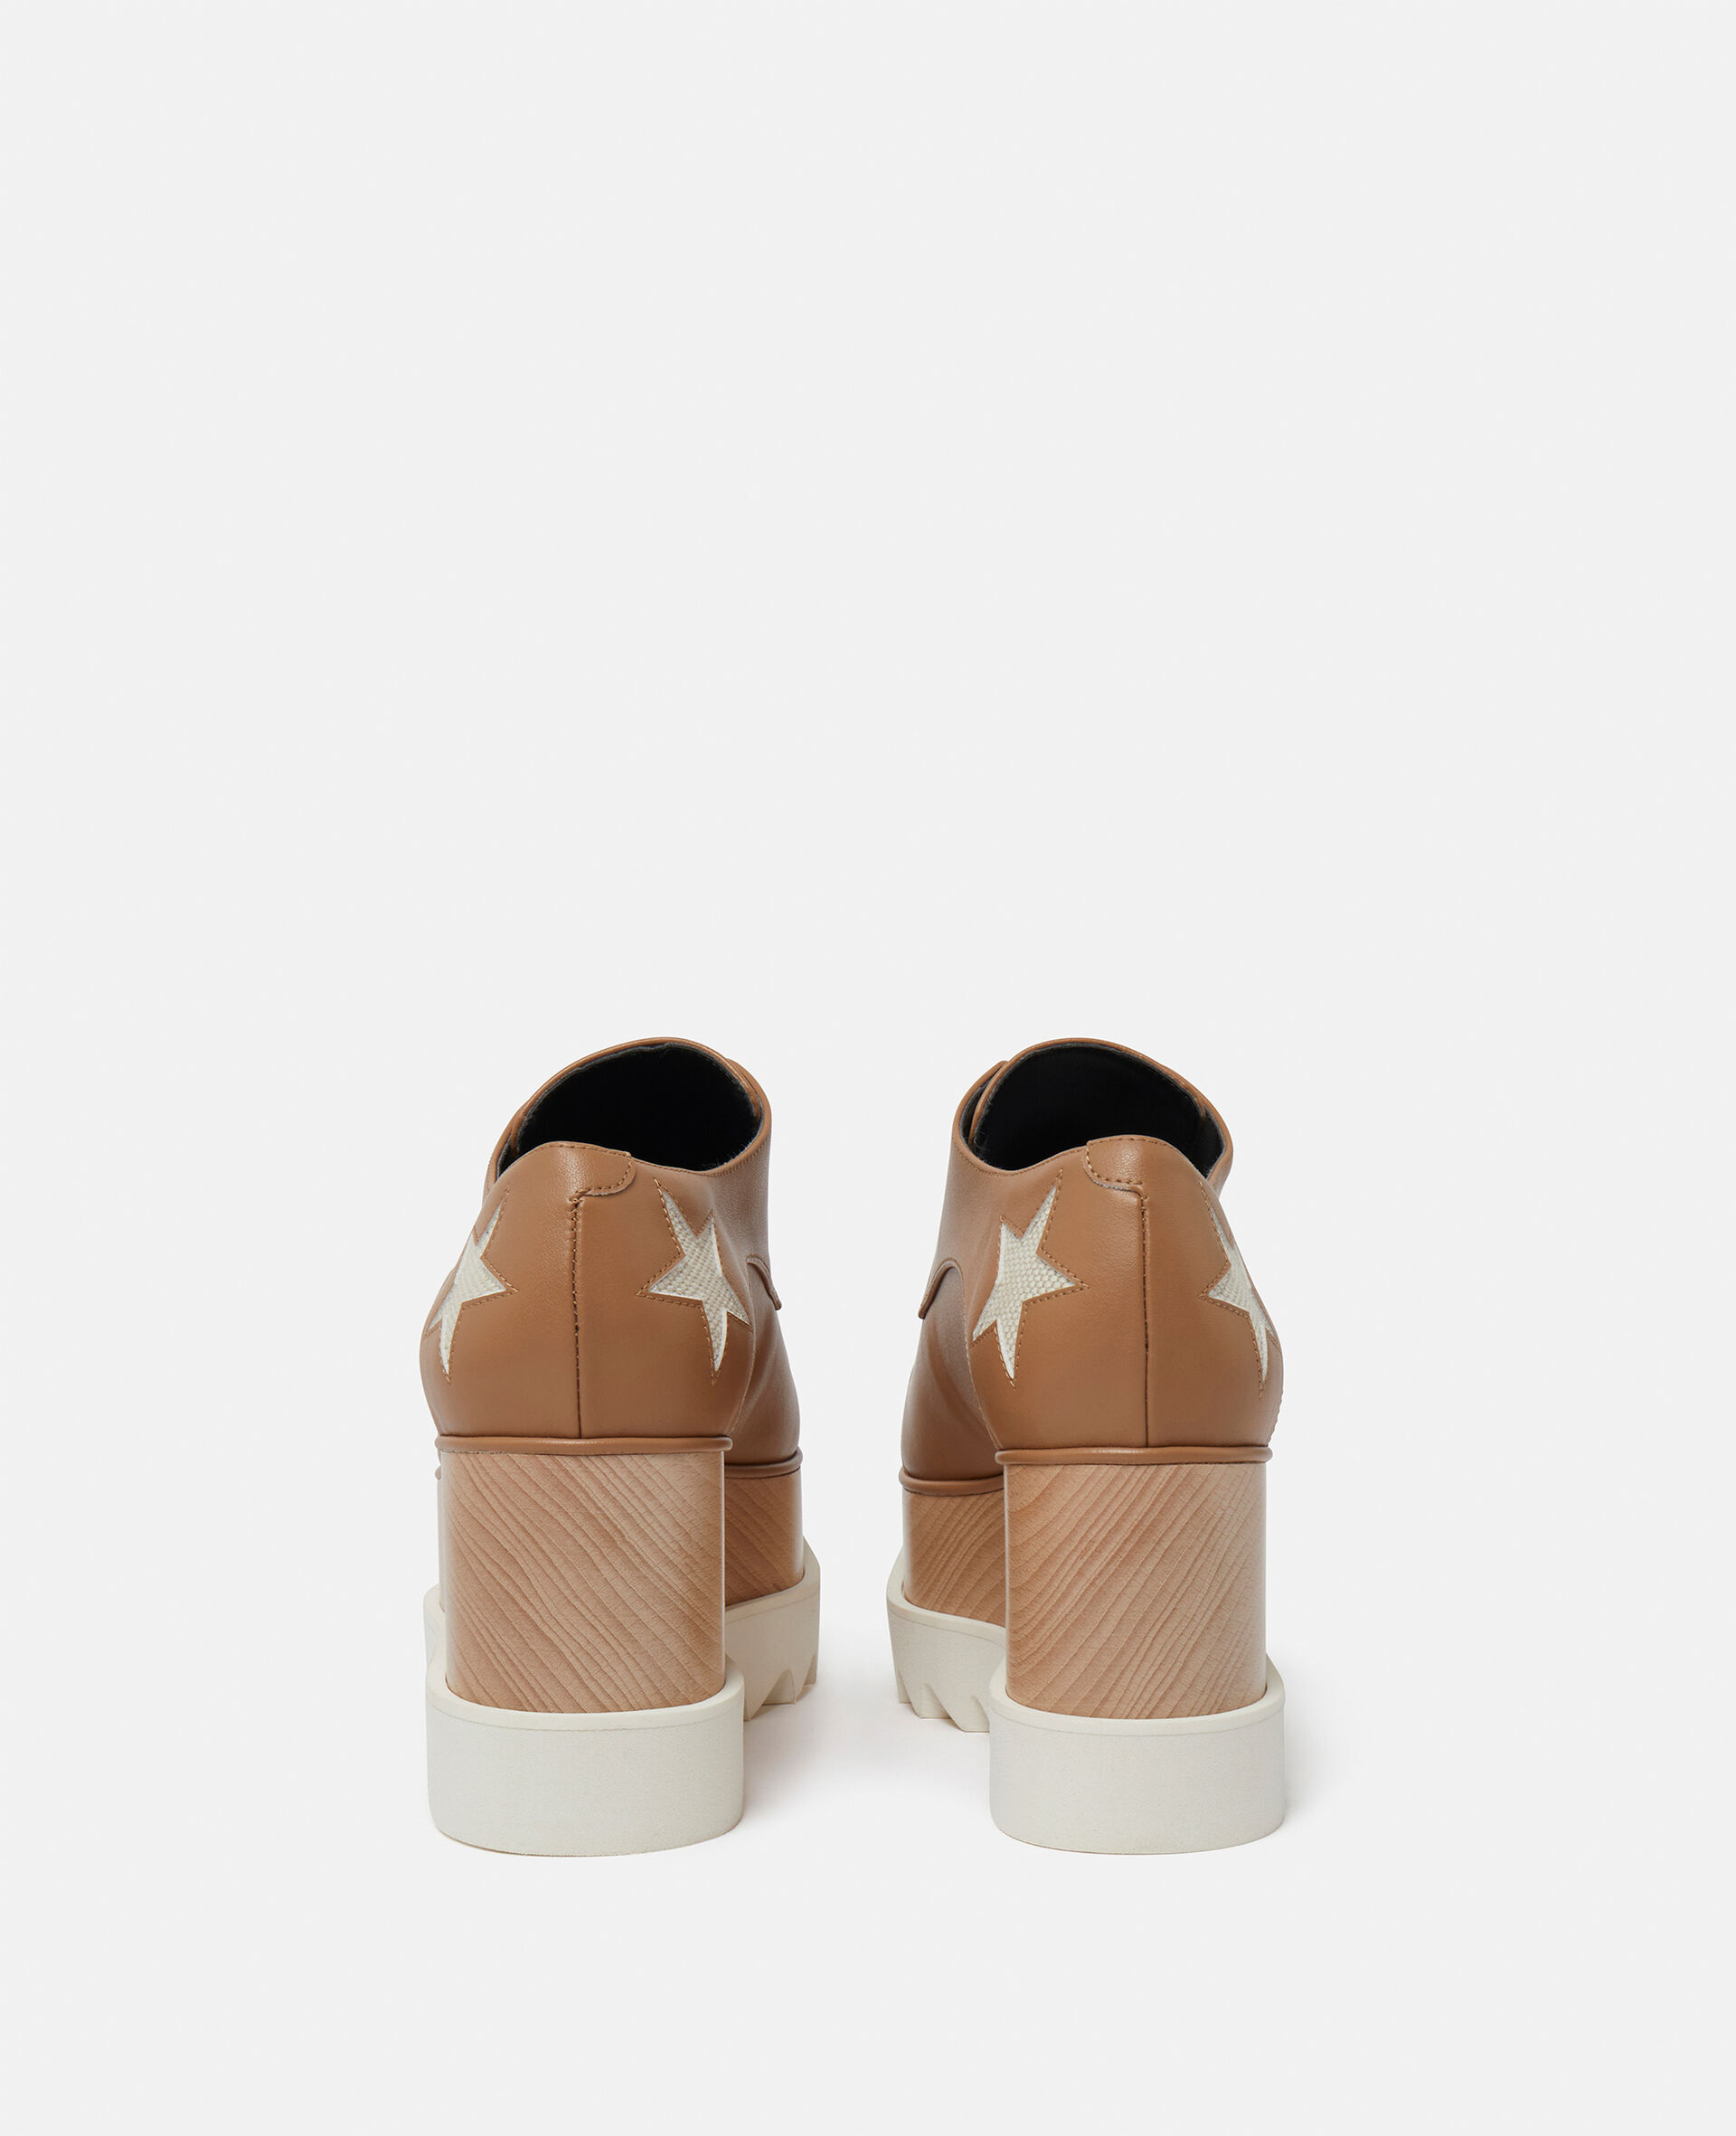 Women's Elyse Shoes Collection